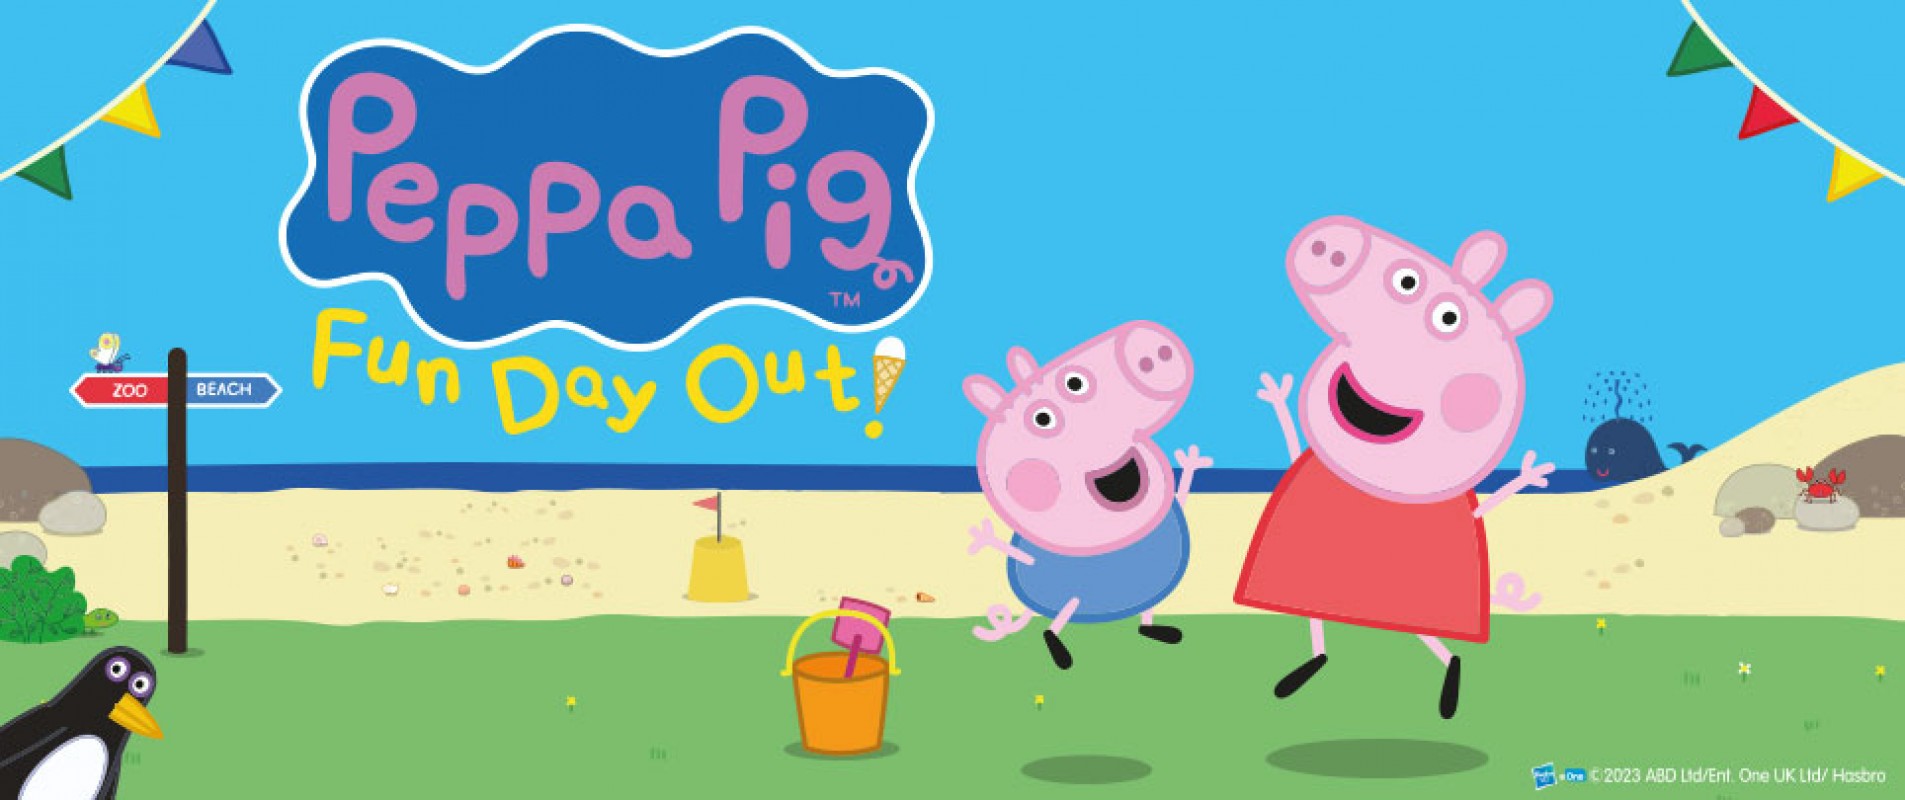 Peppa Pig's Big Day Out